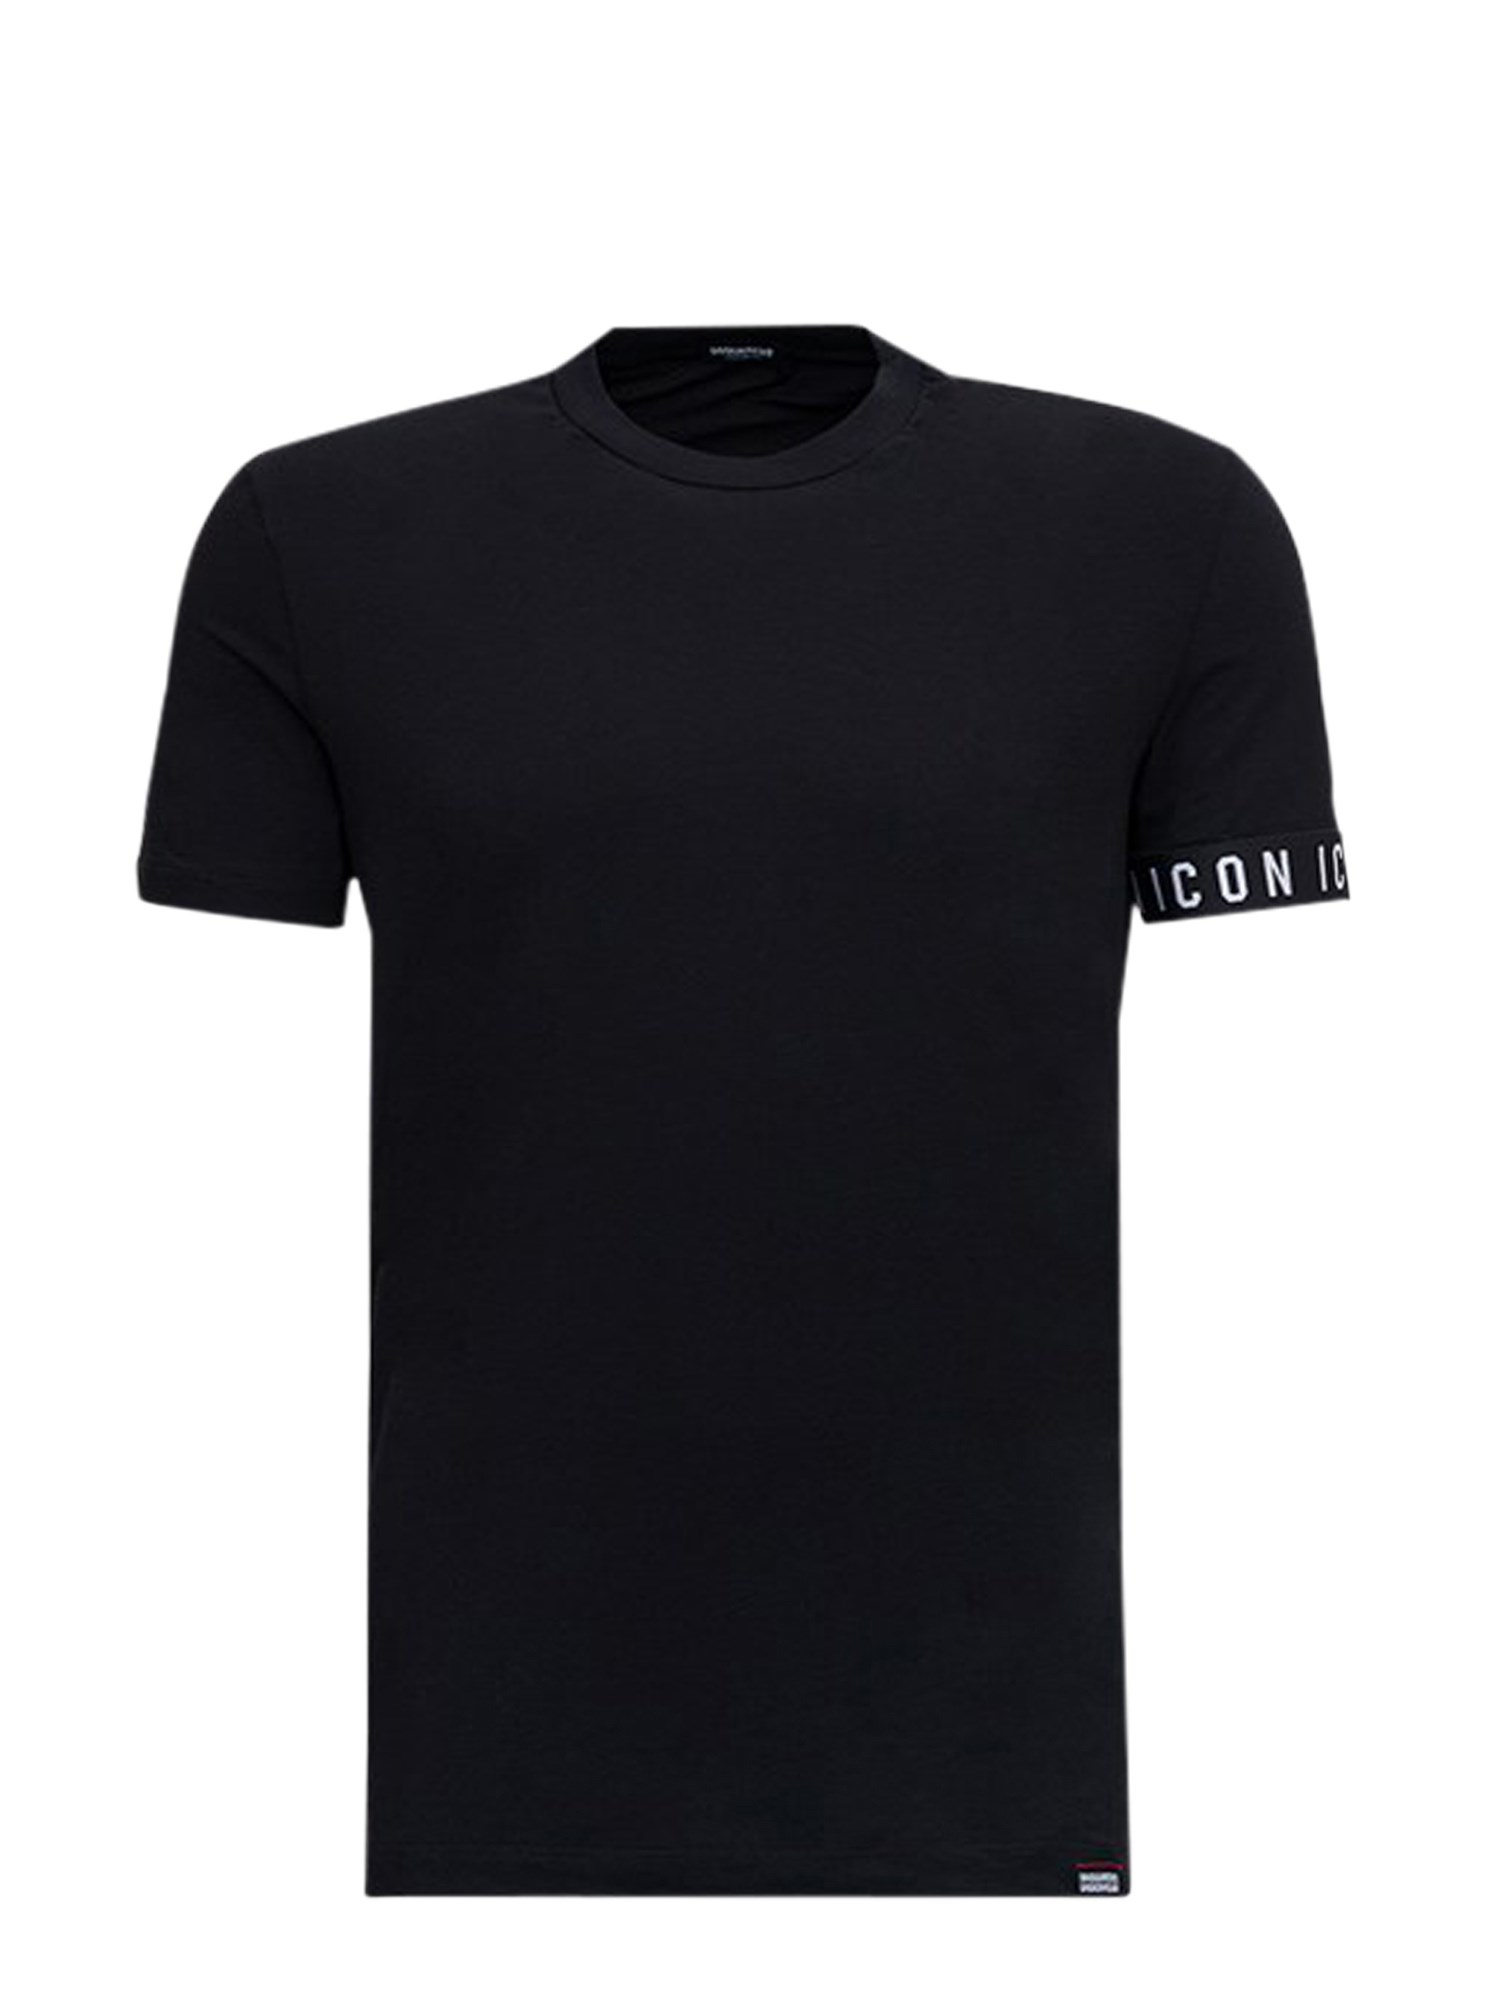 dsquared "icon" t-shirt